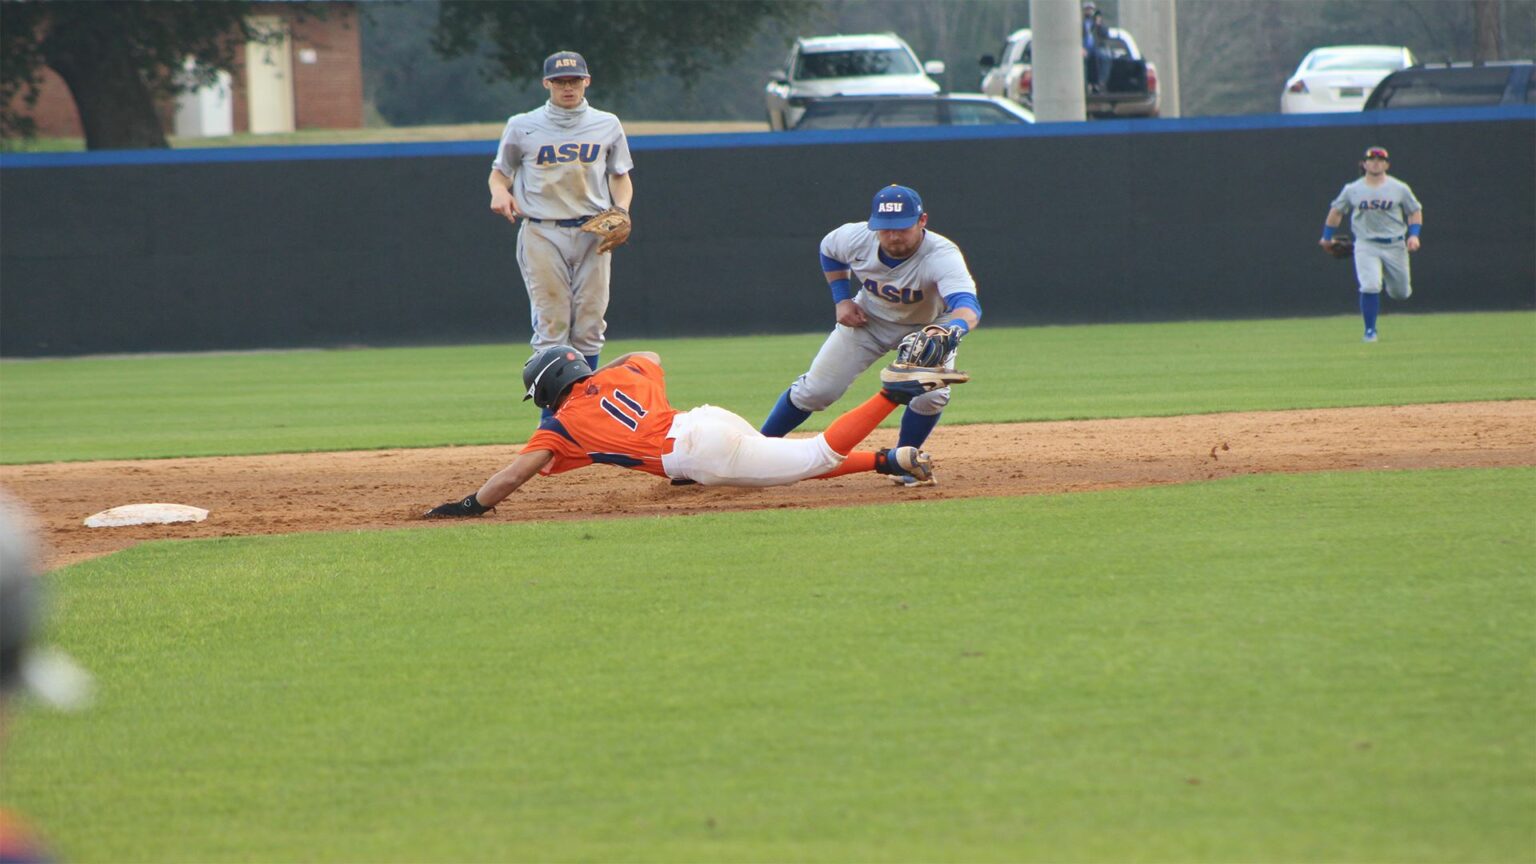 Albany State Baseball Collects Doubleheader Victory Over Lincoln